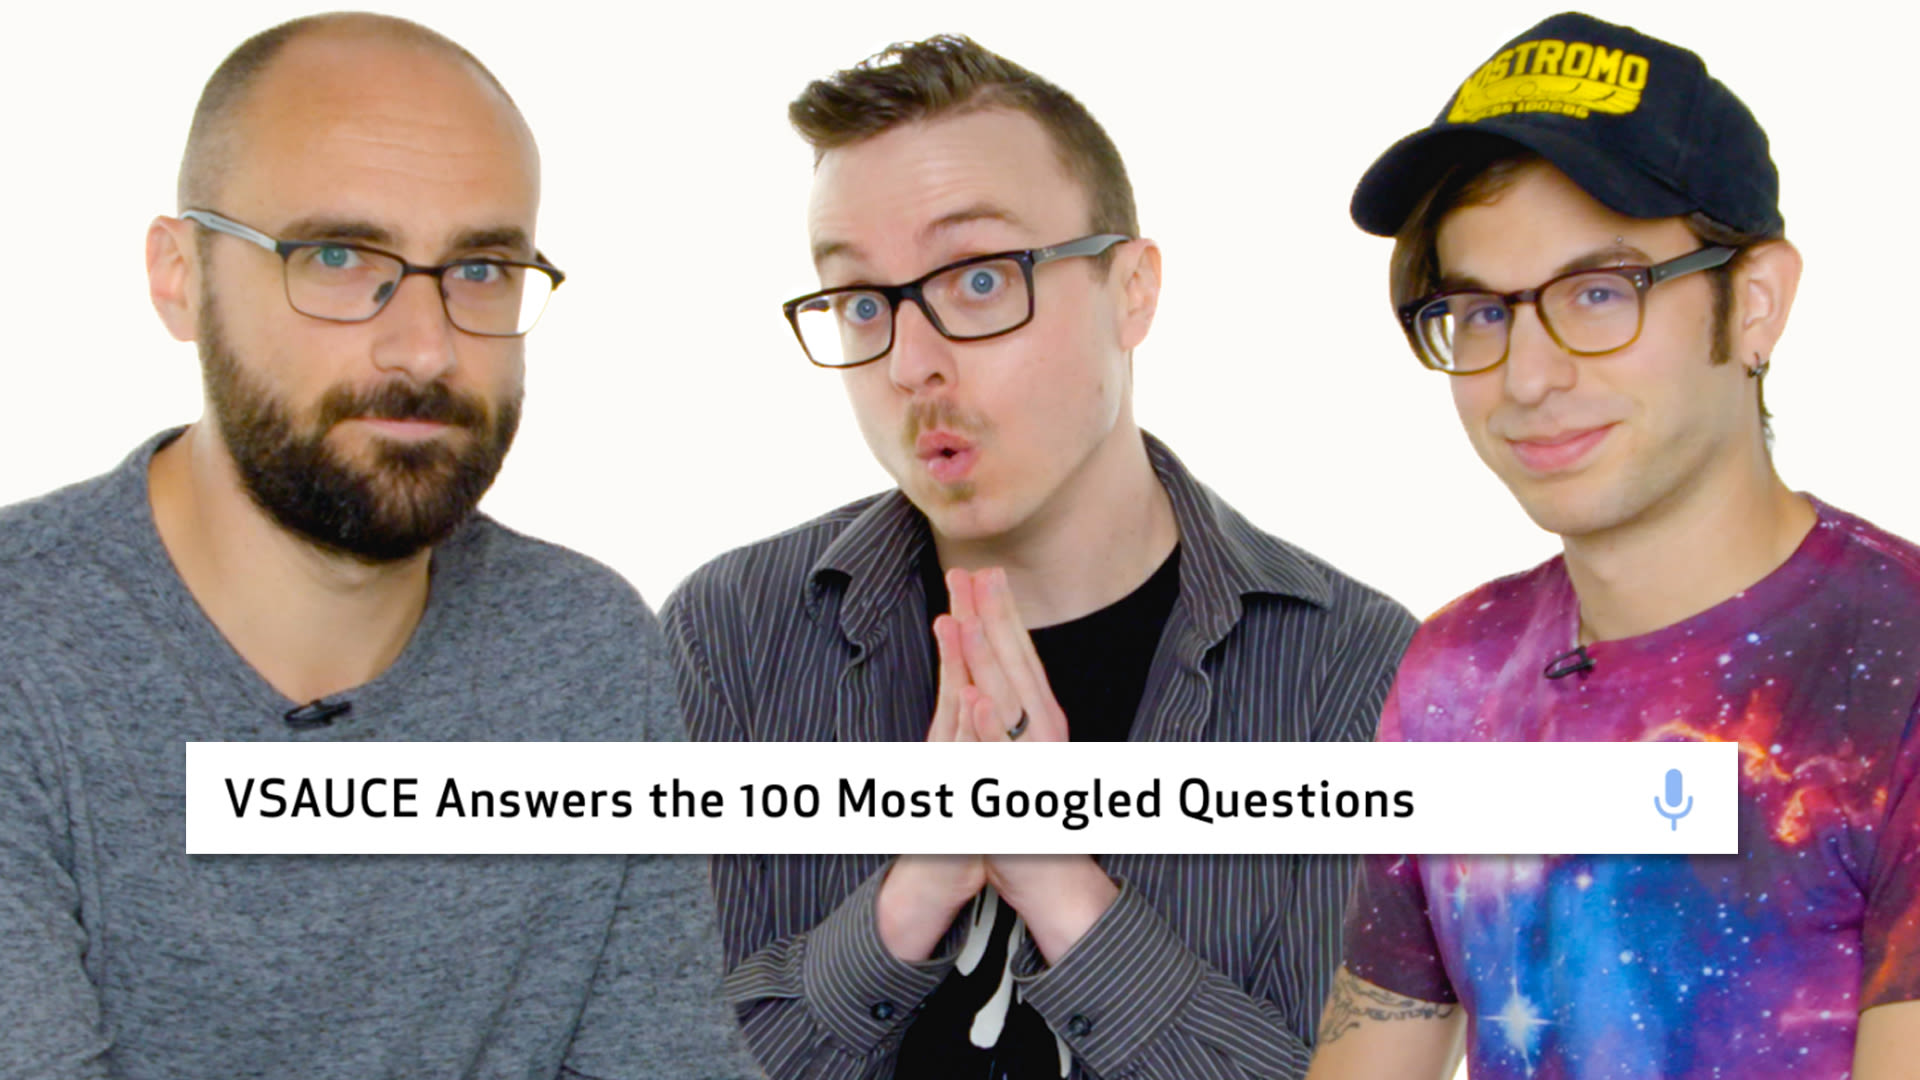 regeringstid økologisk sav Watch Vsauce Answers the 100 Most Googled Questions | WIRED